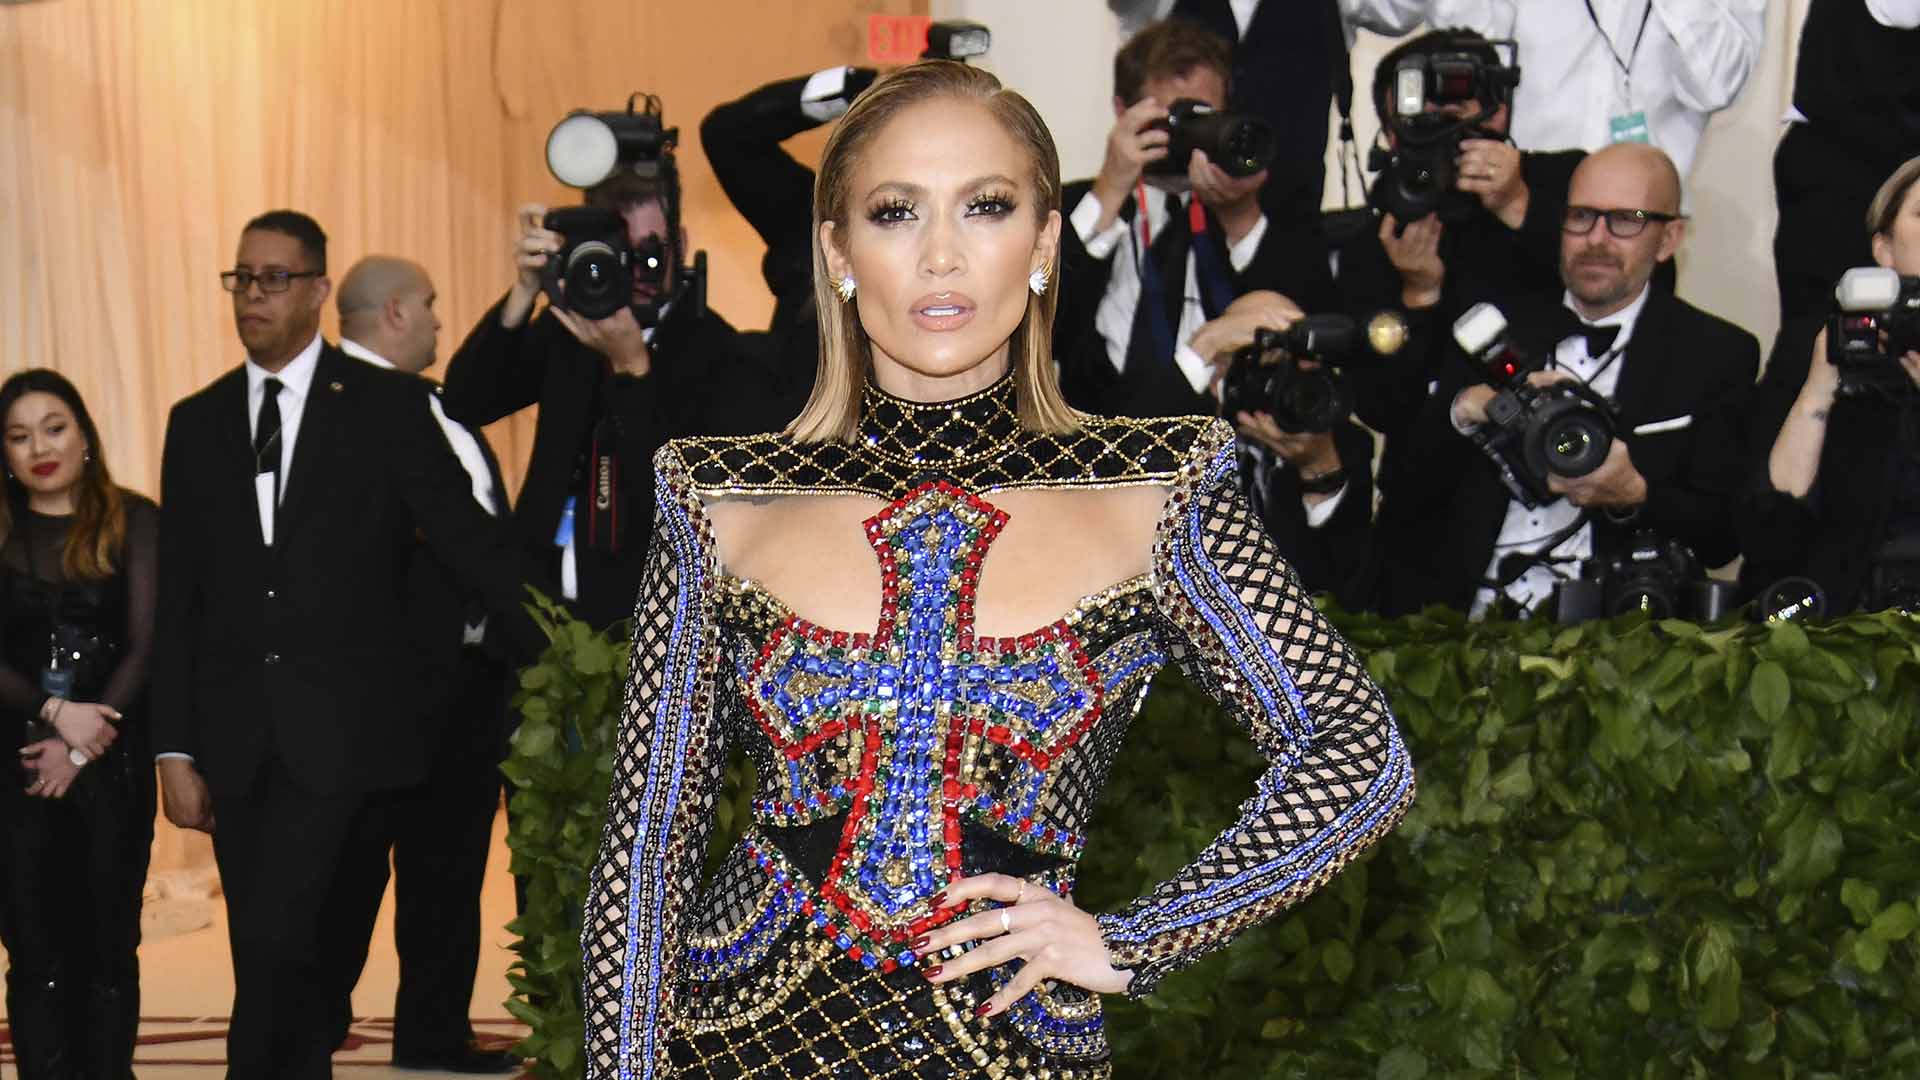 Actress and singer Jennifer Lopez at the Metropolitan Museum of Art Costume Institute Gala (Met Gala) to celebrate the opening of "Heavenly Bodies: Fashion and the Catholic Imagination" in New York, U.S., May 7, 2018